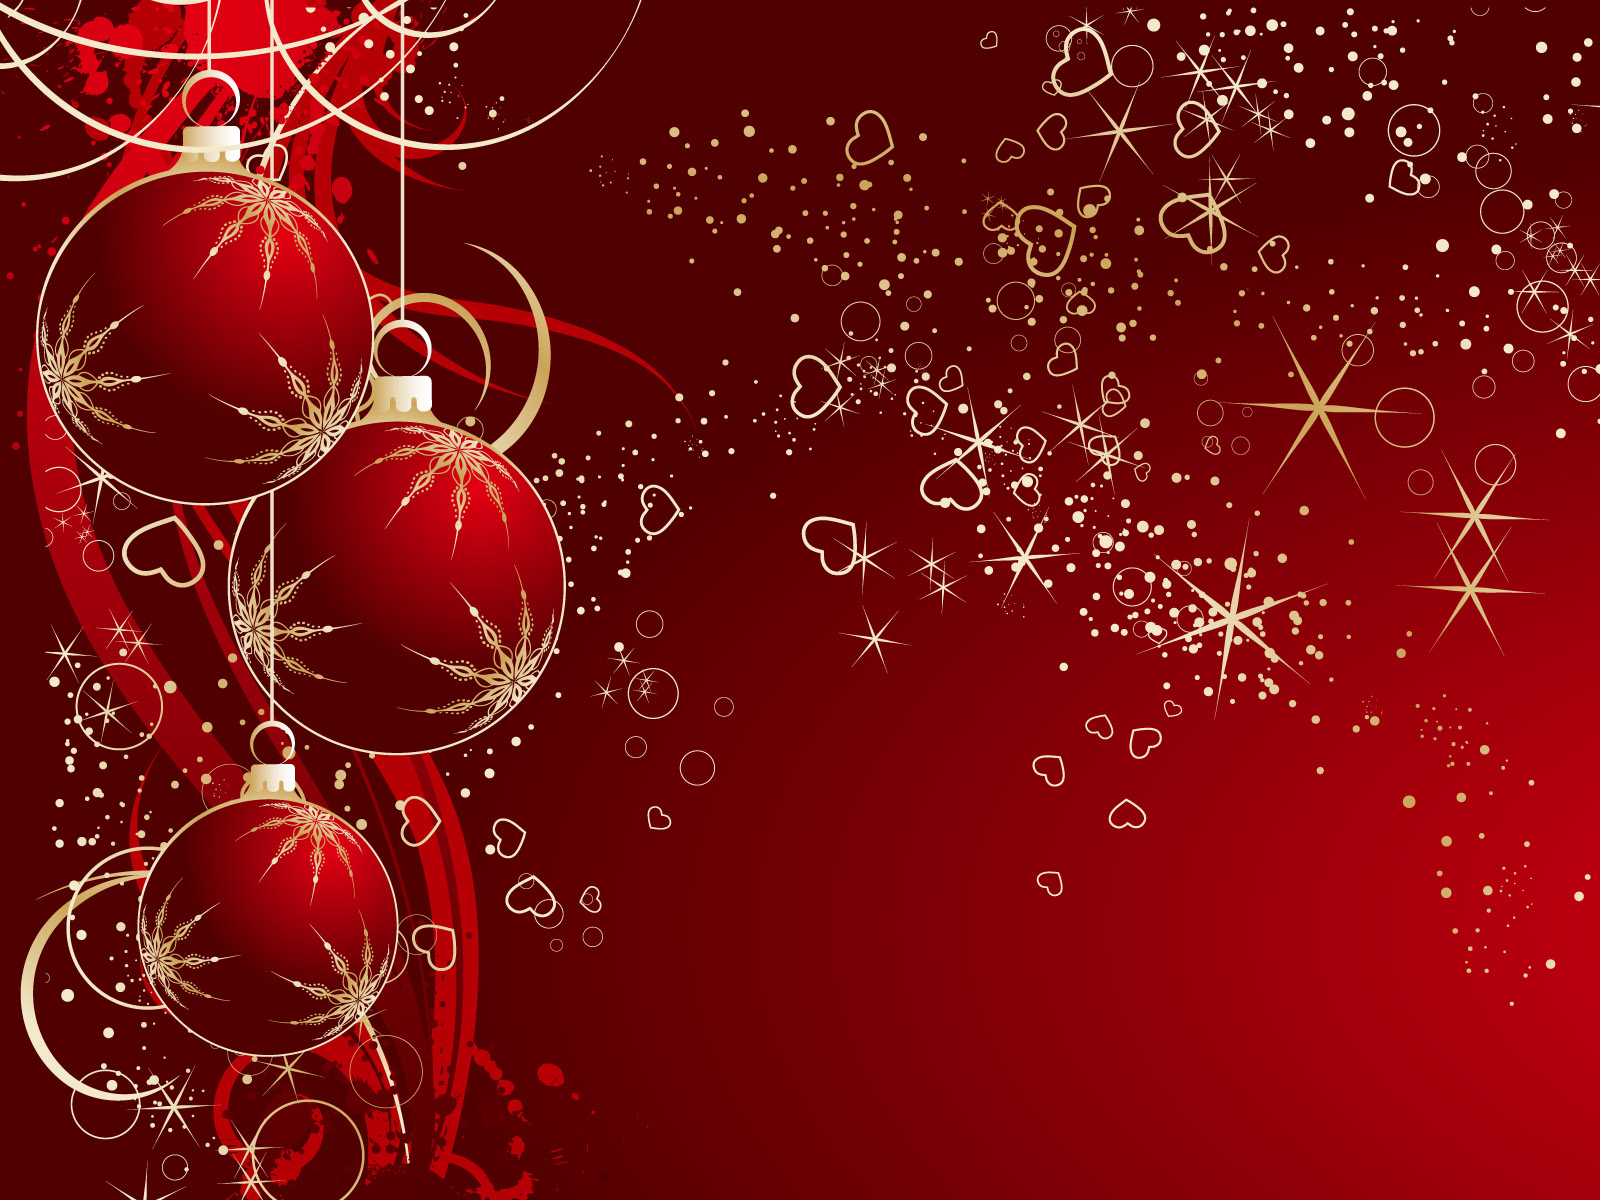 Free Christmas Wallpaper Backgrounds | Wallpapers9